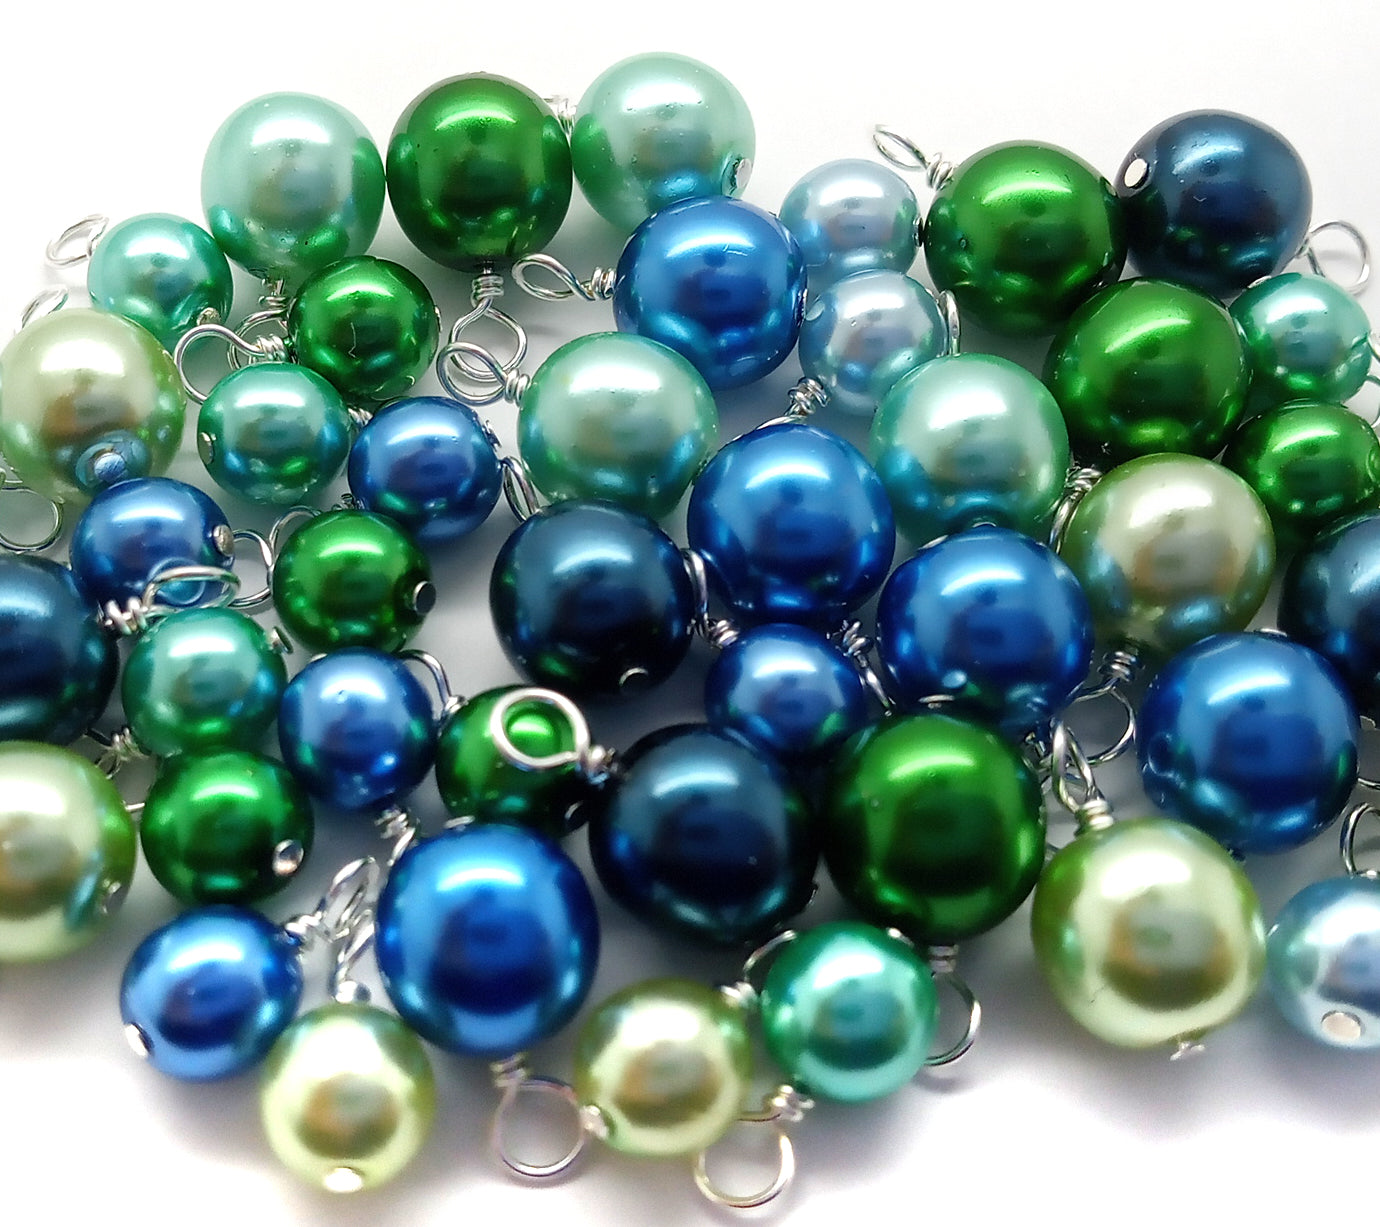 Bead Dangle Mix in Blue & Green, 20 pc 6mm 8mm Glass Pearls, Silver-Plated Wire, Adorabilities